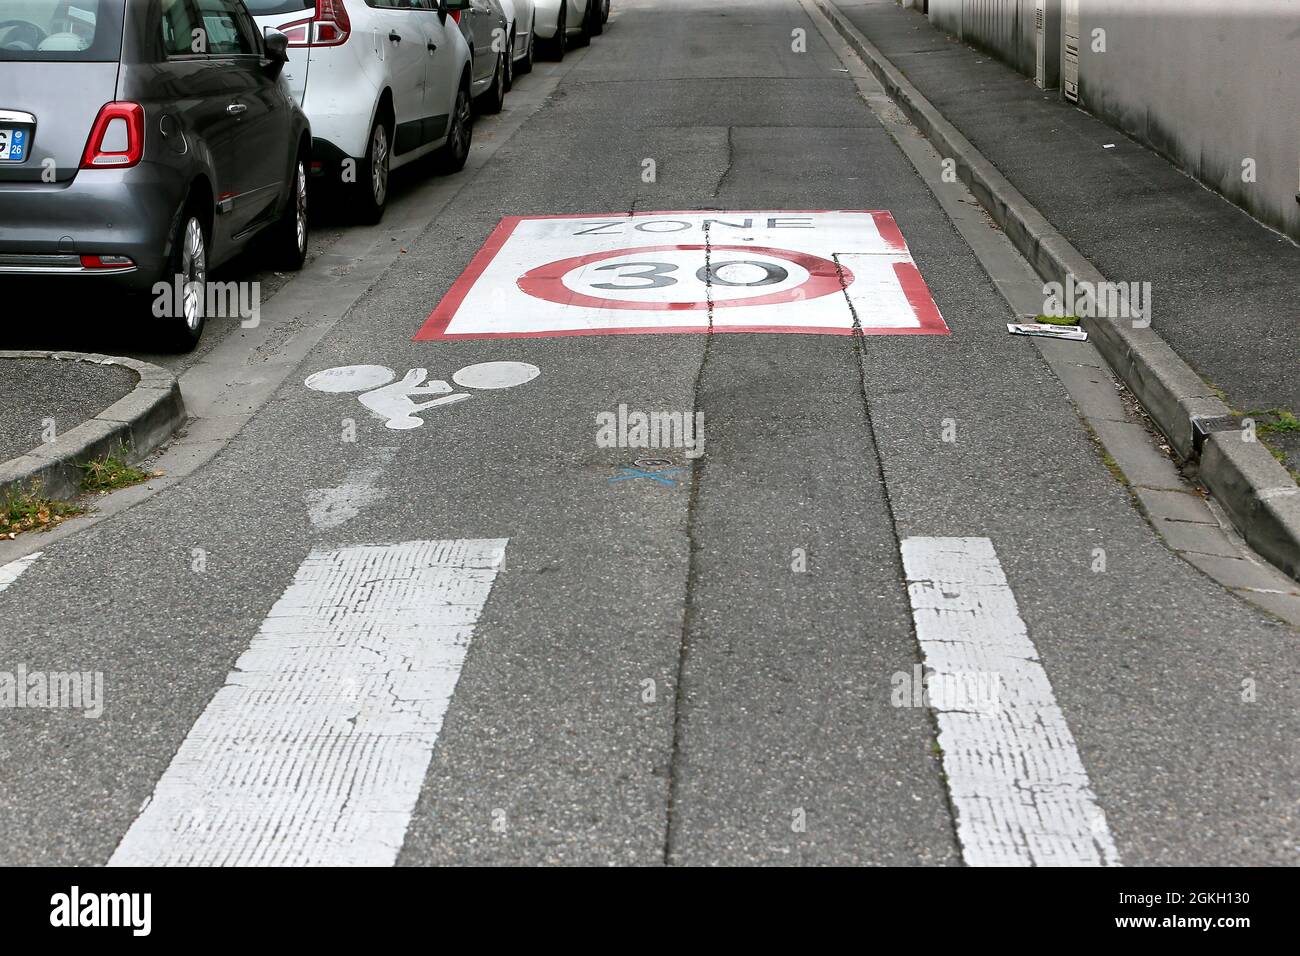 France, Valence, 2021-09-03. Illustration of a zone 30 announced by a ground inscription with a bicycle logo for the cycle track and a pedestrian cros Stock Photo